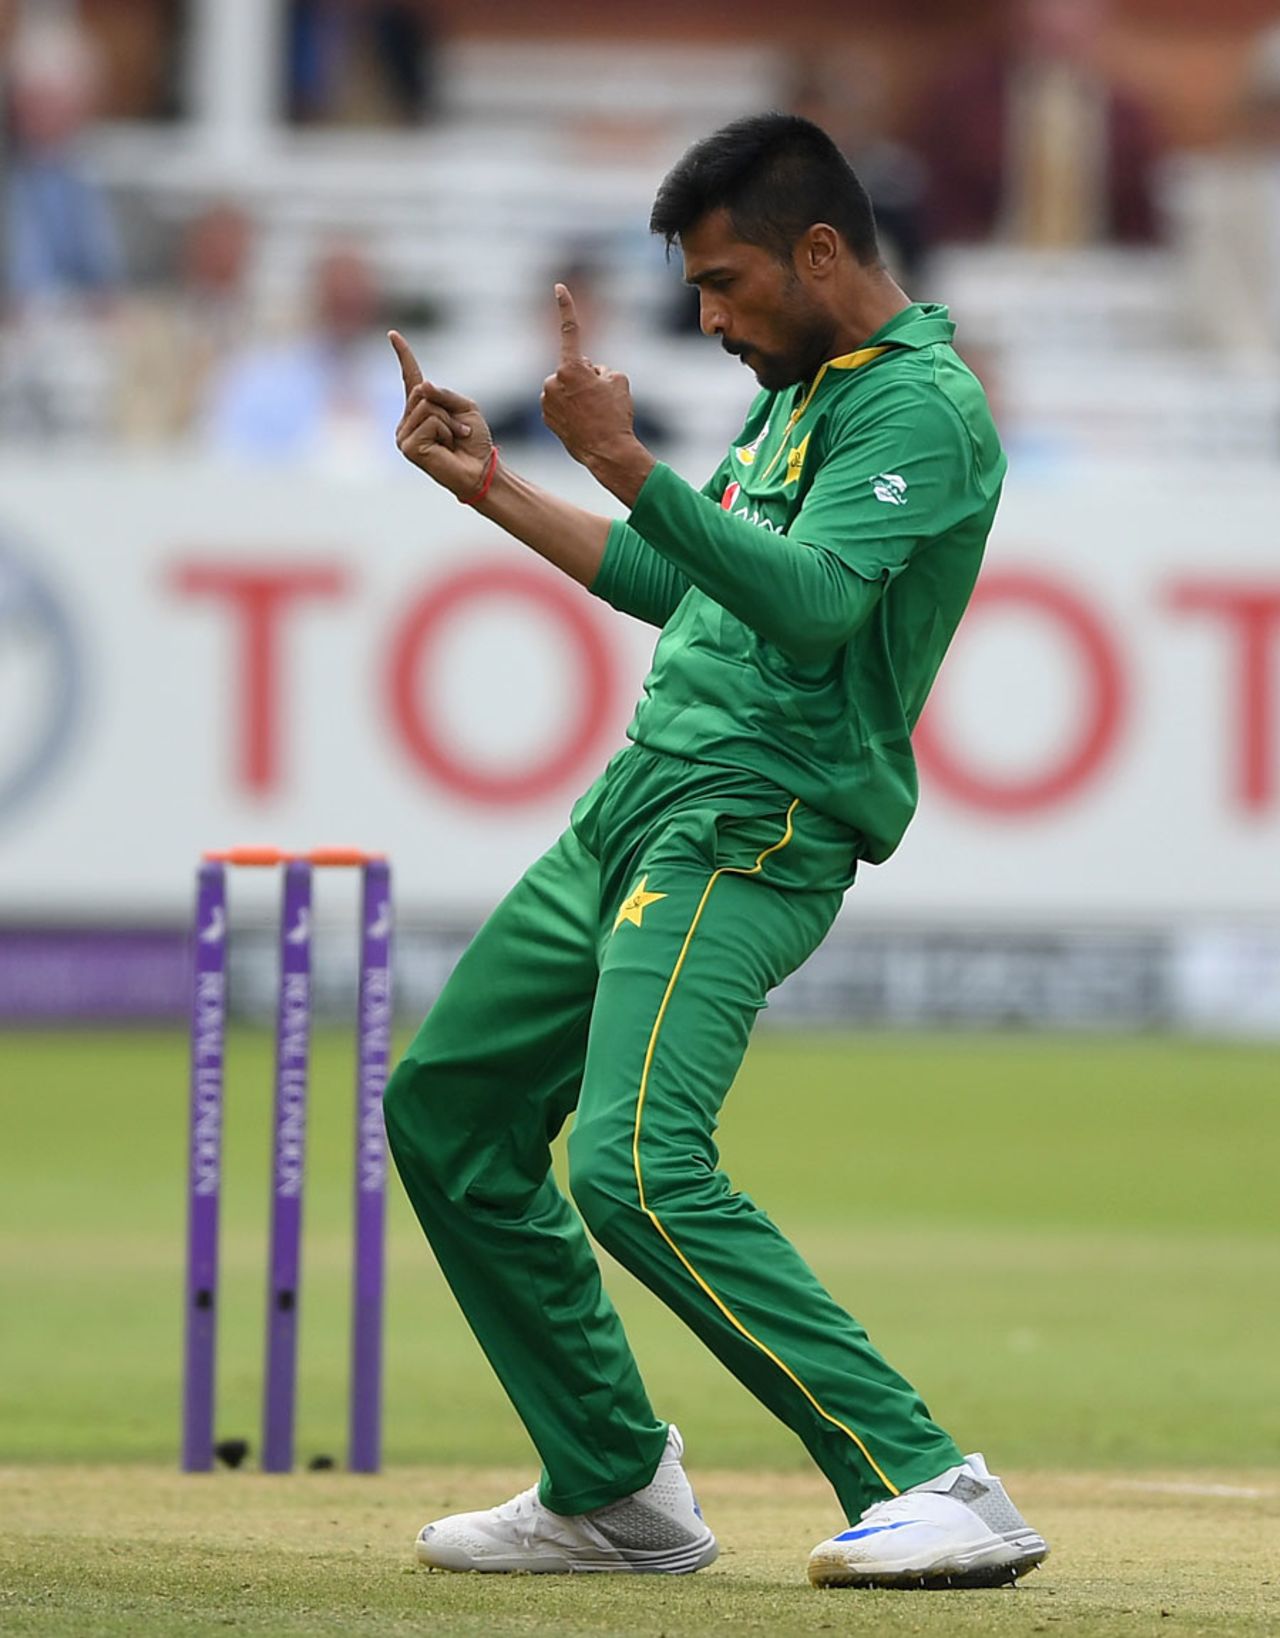 Mohammad Amir struck second ball to remove Jason Roy, England v Pakistan, 2nd ODI, Lord's, August 27, 2016